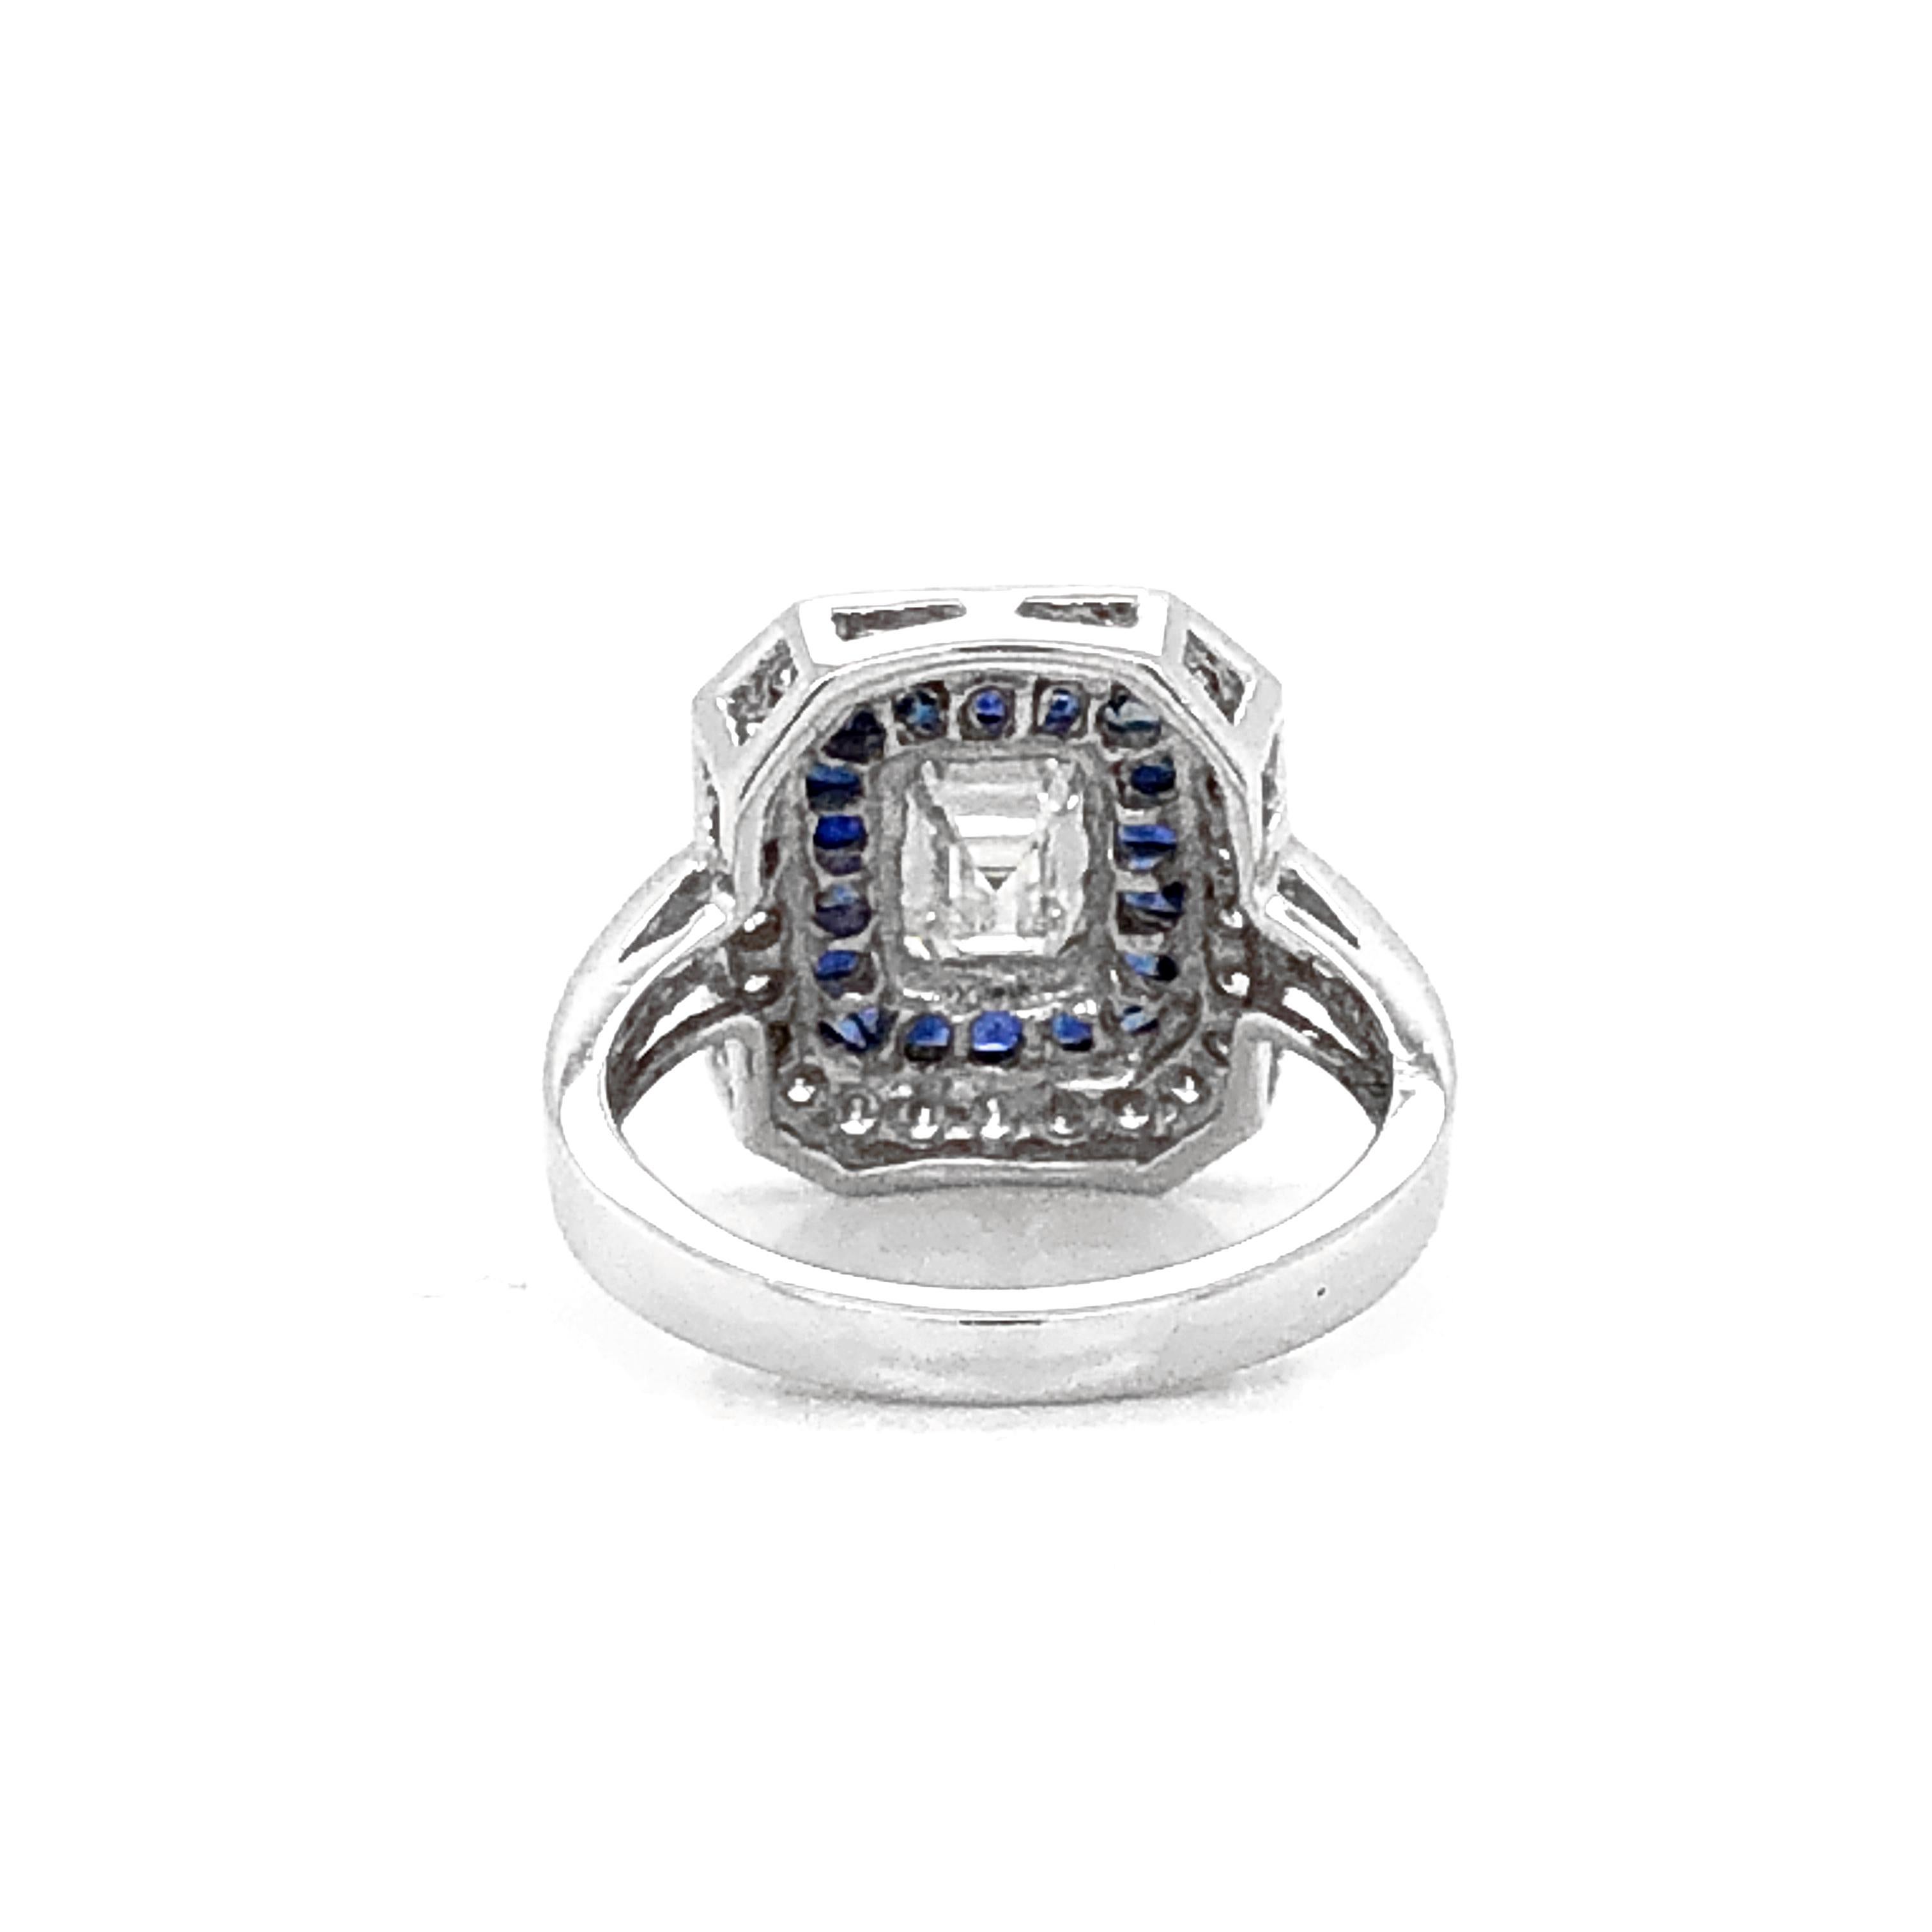 Women's or Men's GIA Certified Emerald Cut Diamond 1.01 Carat Sapphires Diamonds Cocktail Ring For Sale